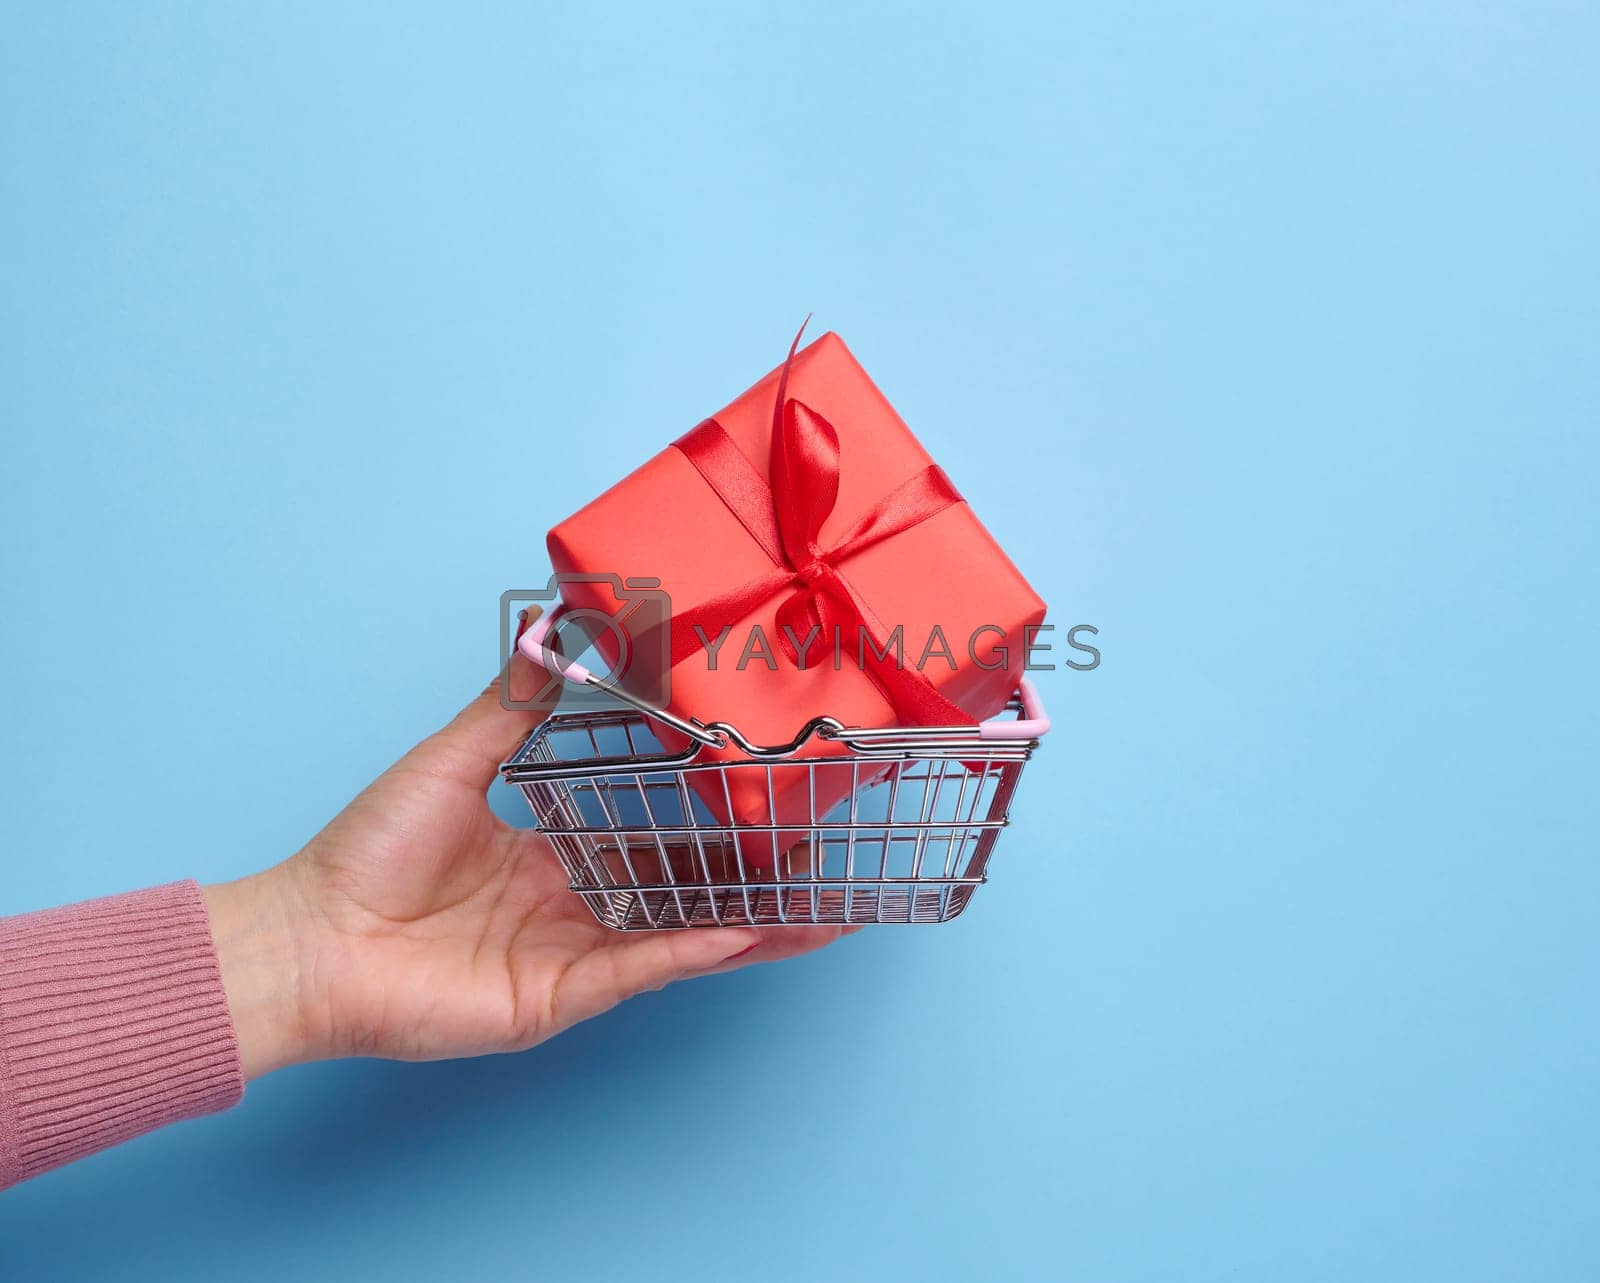 Royalty free image of A woman's hand holds a red gift box wrapped in mid-air against a blue background, concept of celebration, surprise by ndanko